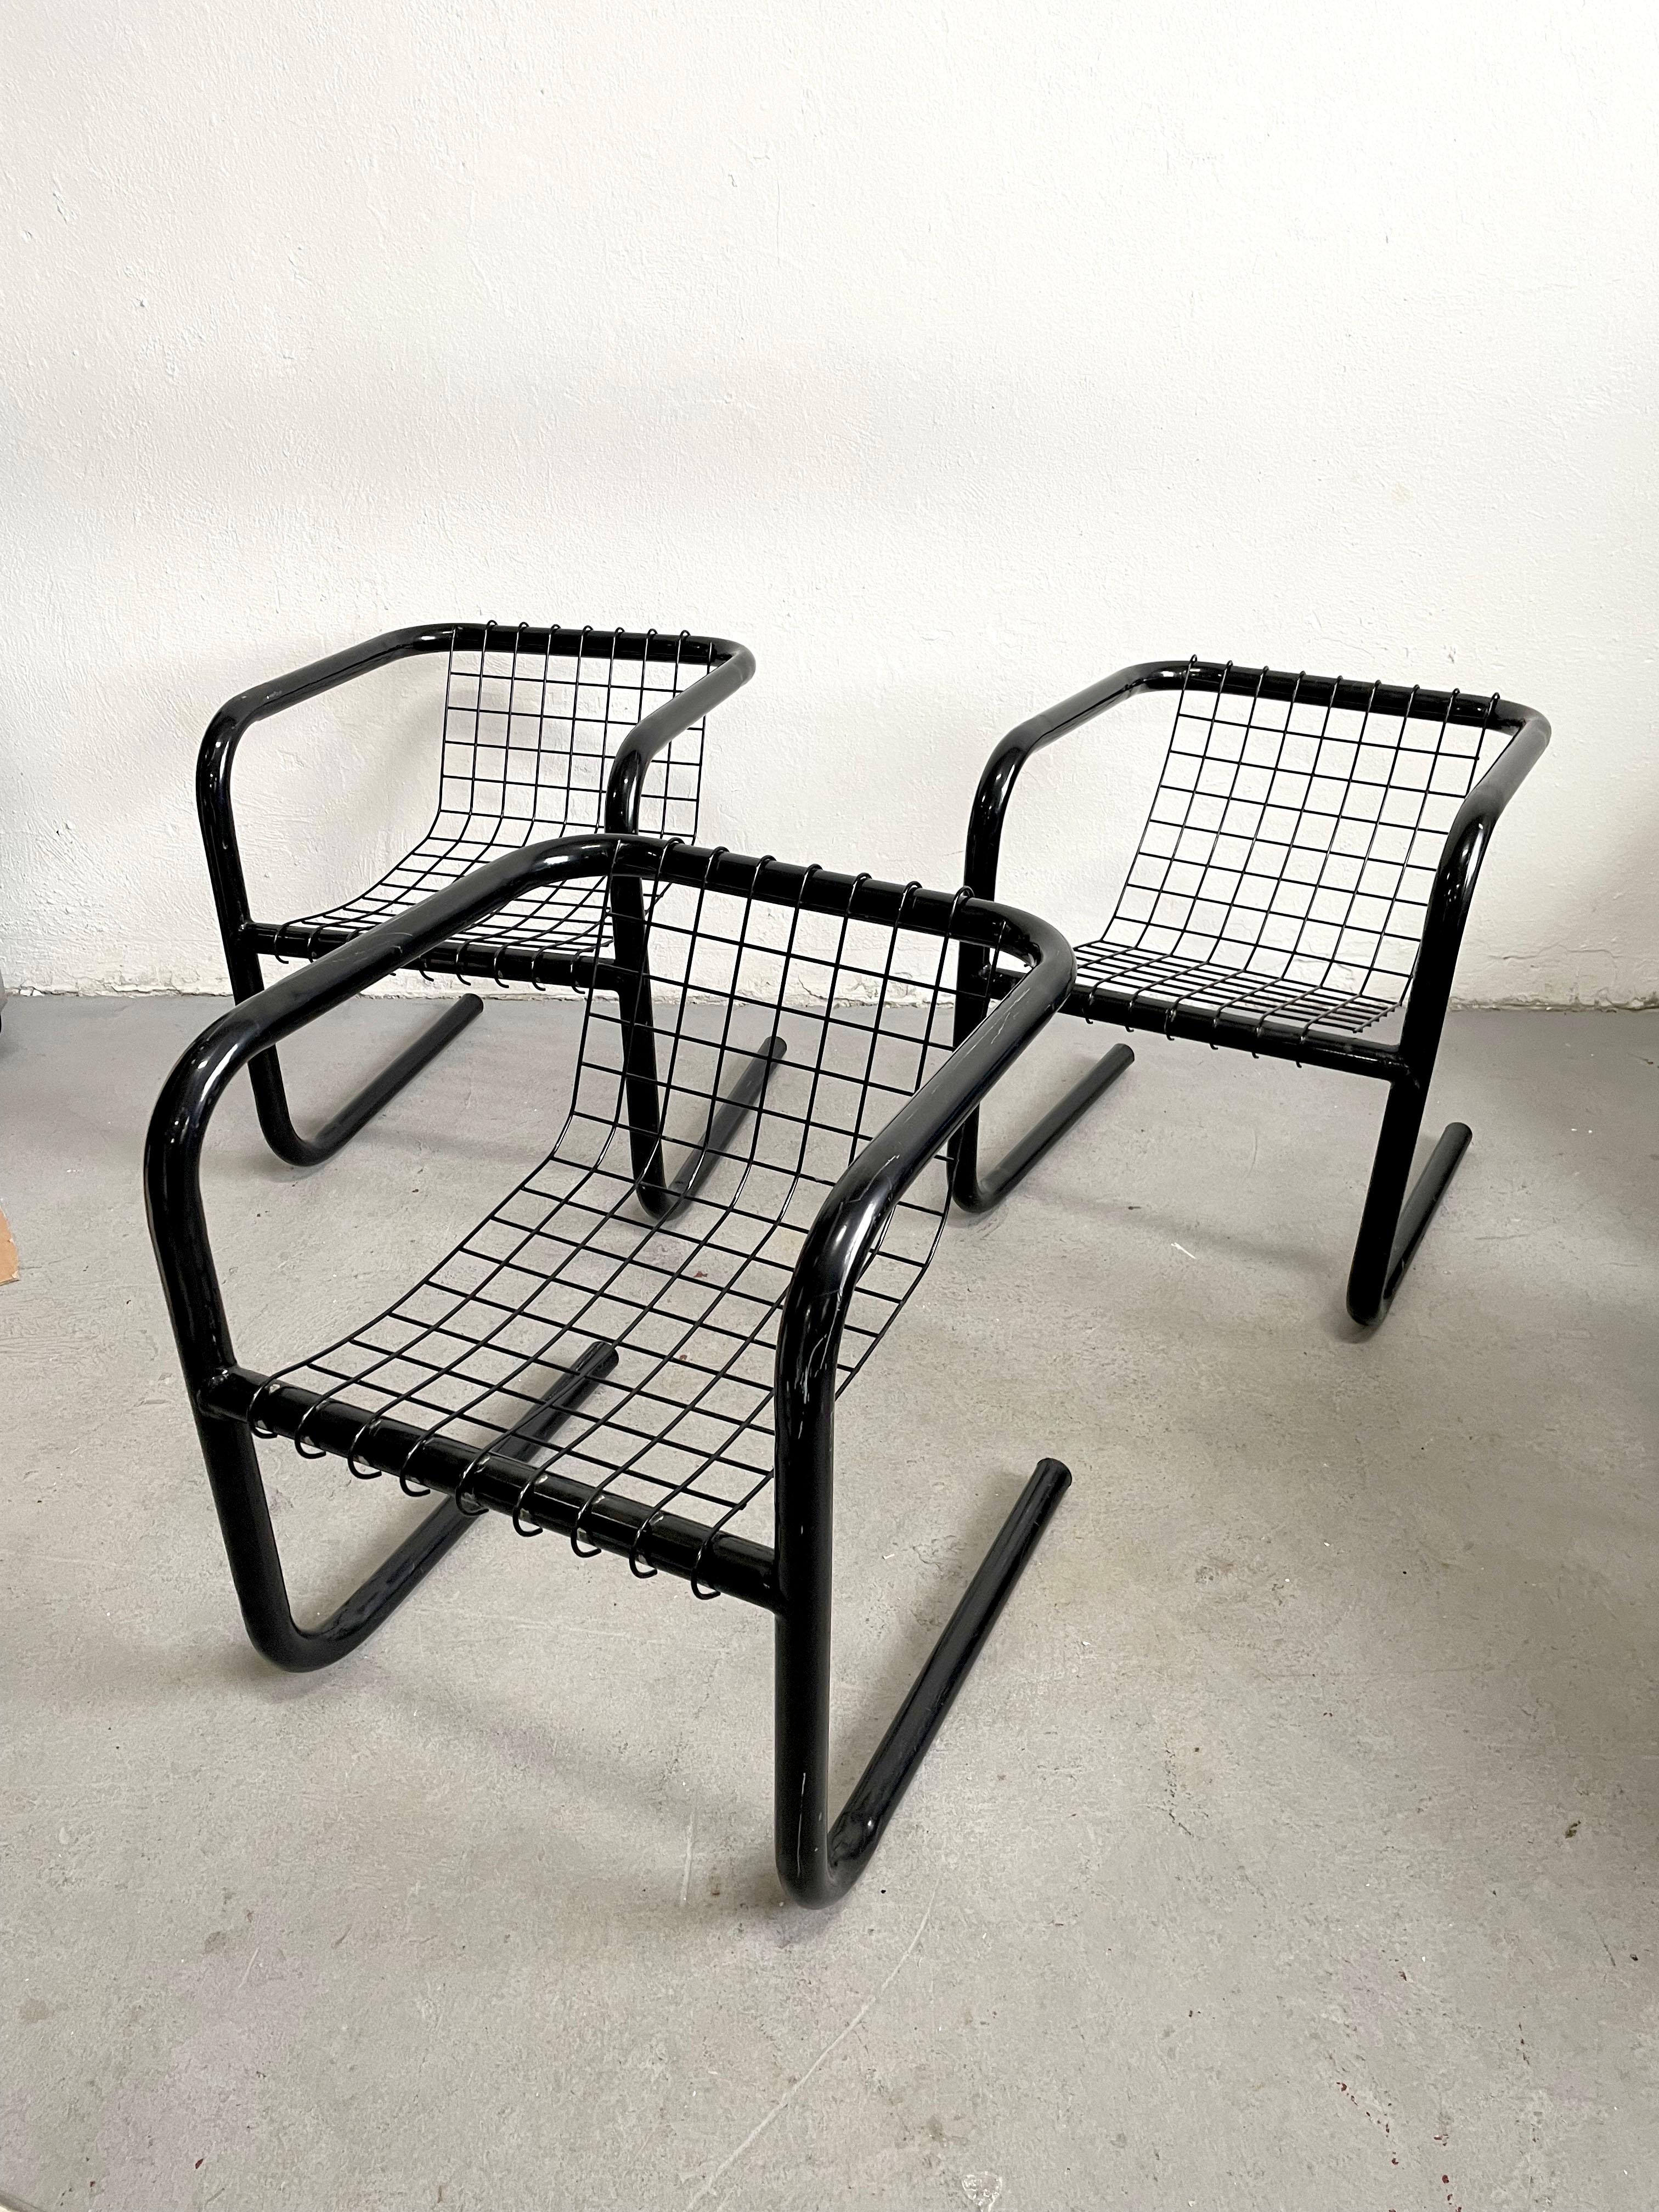 European 1/3 Vintage Mid-Century 1970's Cantilever Lacquered Metal Chair, Mesh Metal Seat For Sale